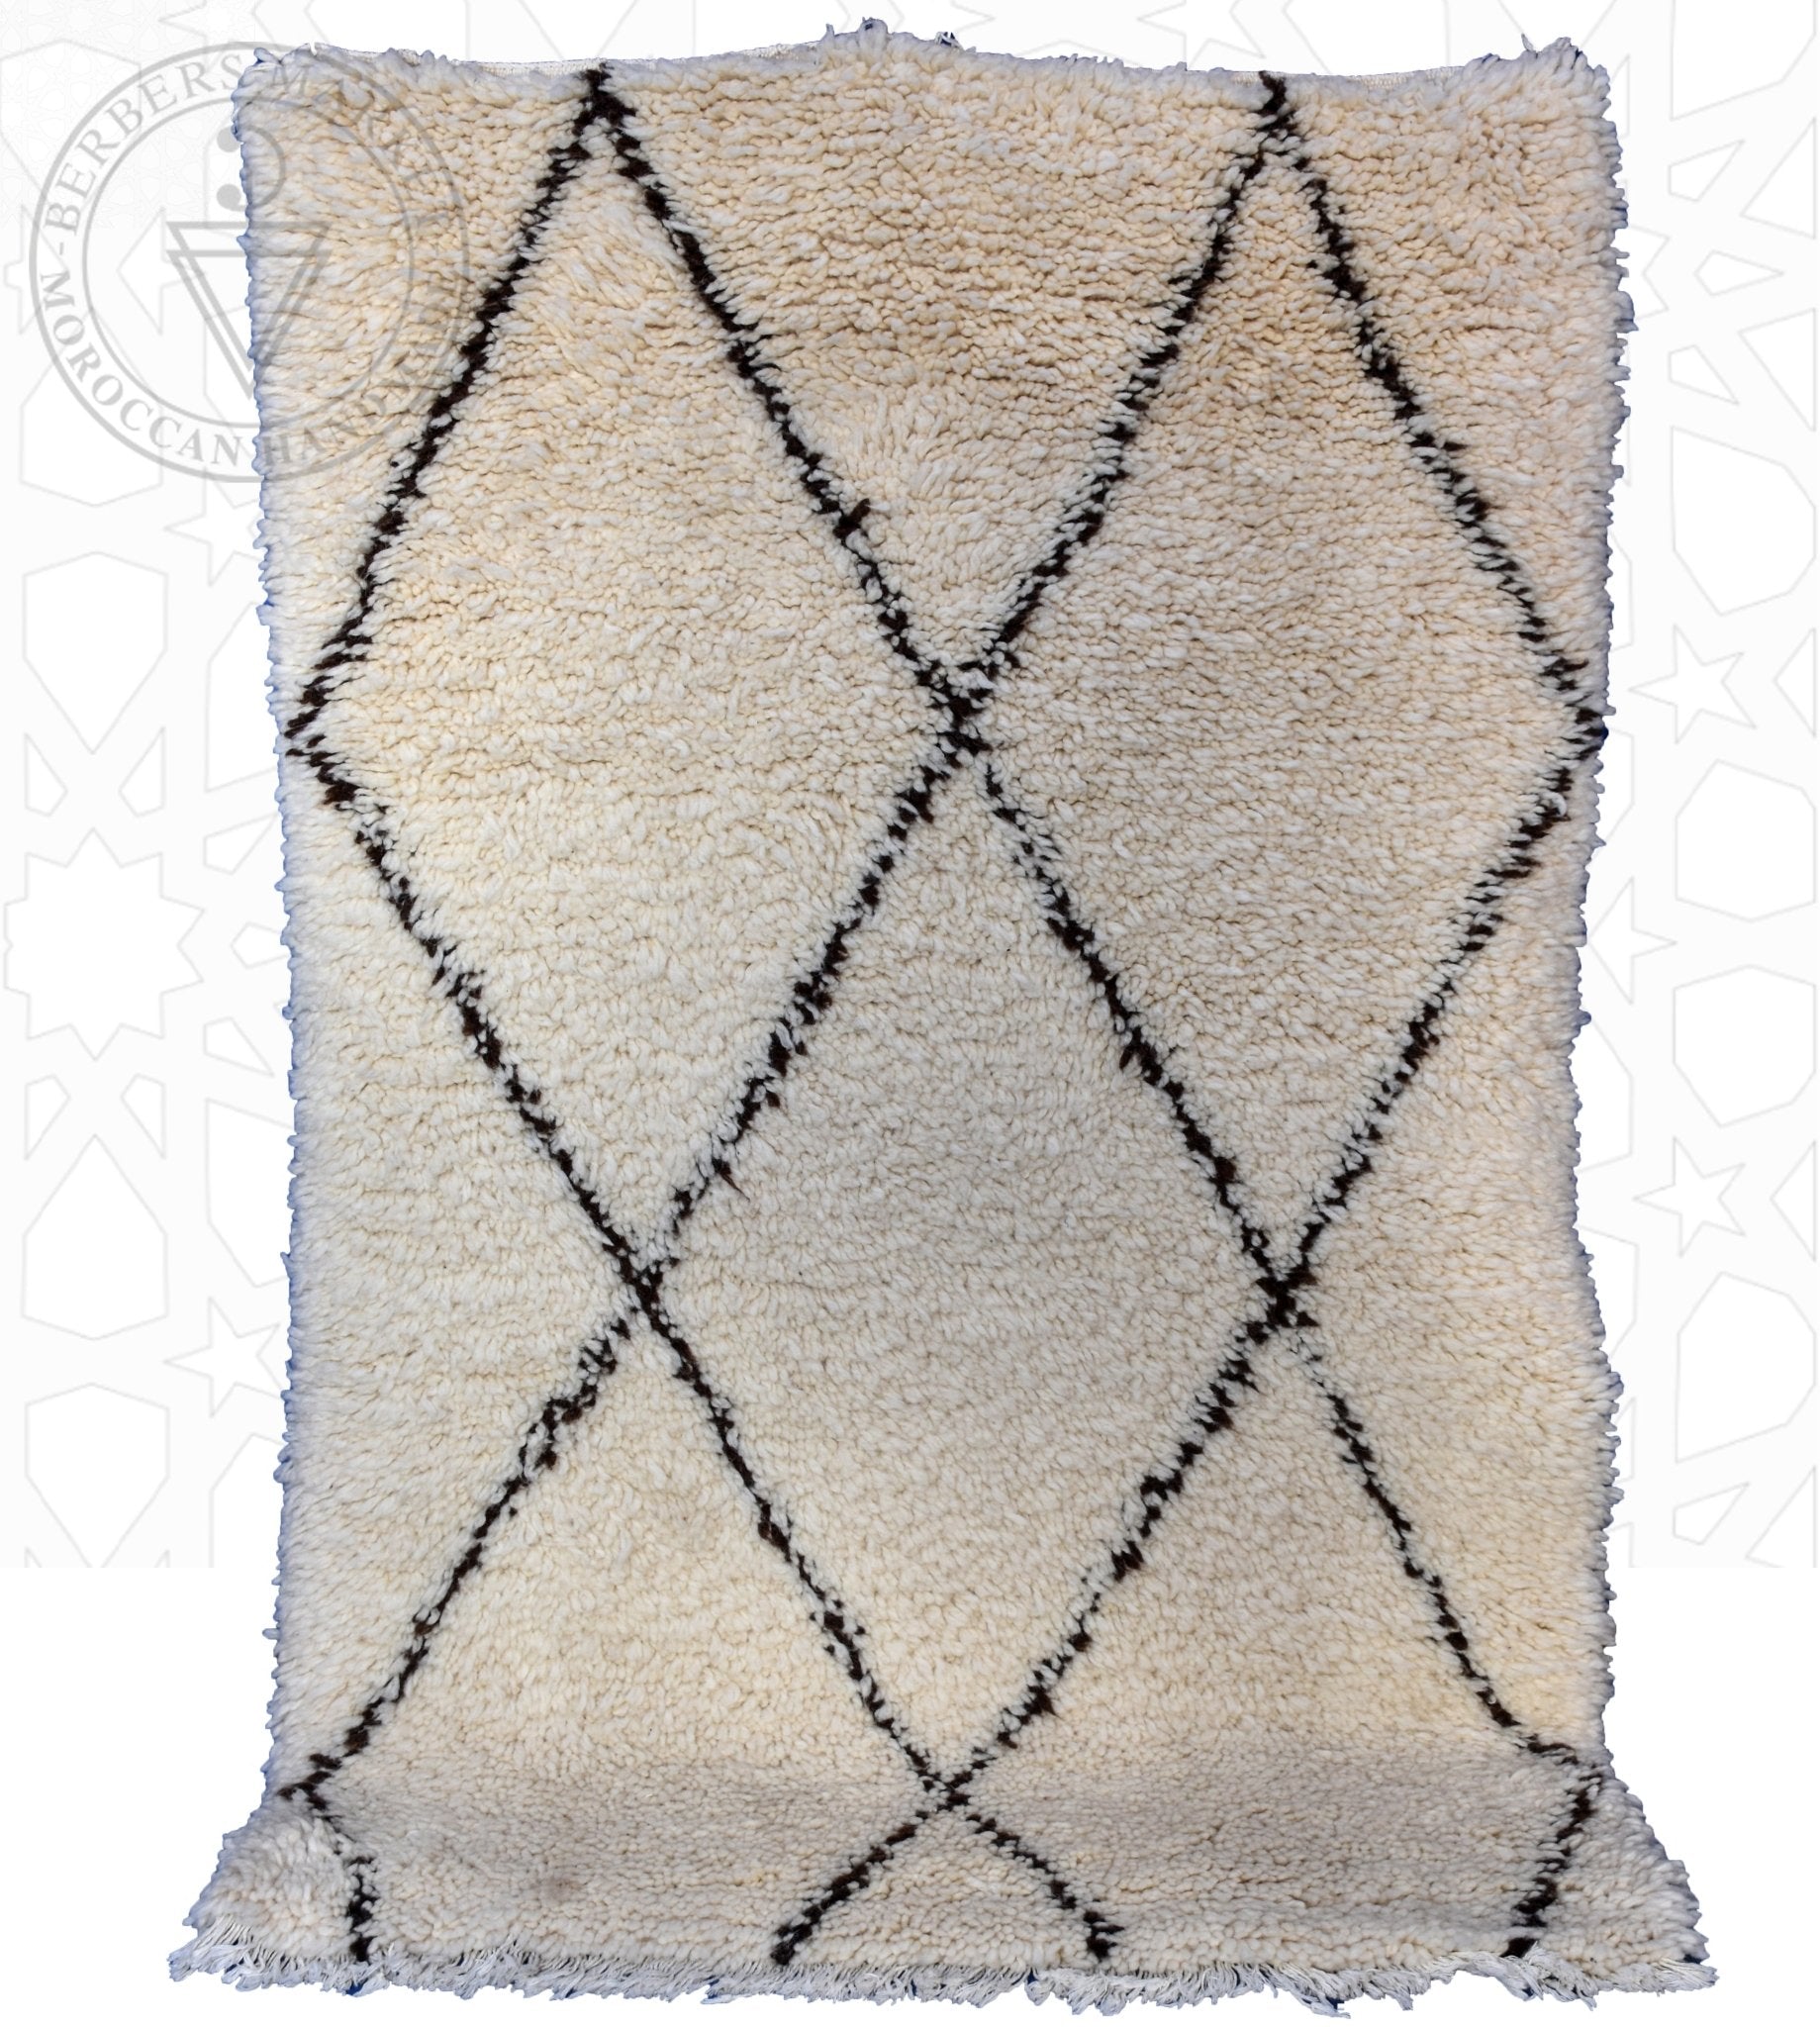 Beni ourain moroccan rug, size: 5 x 6.4 ft, 150 x 195 cm